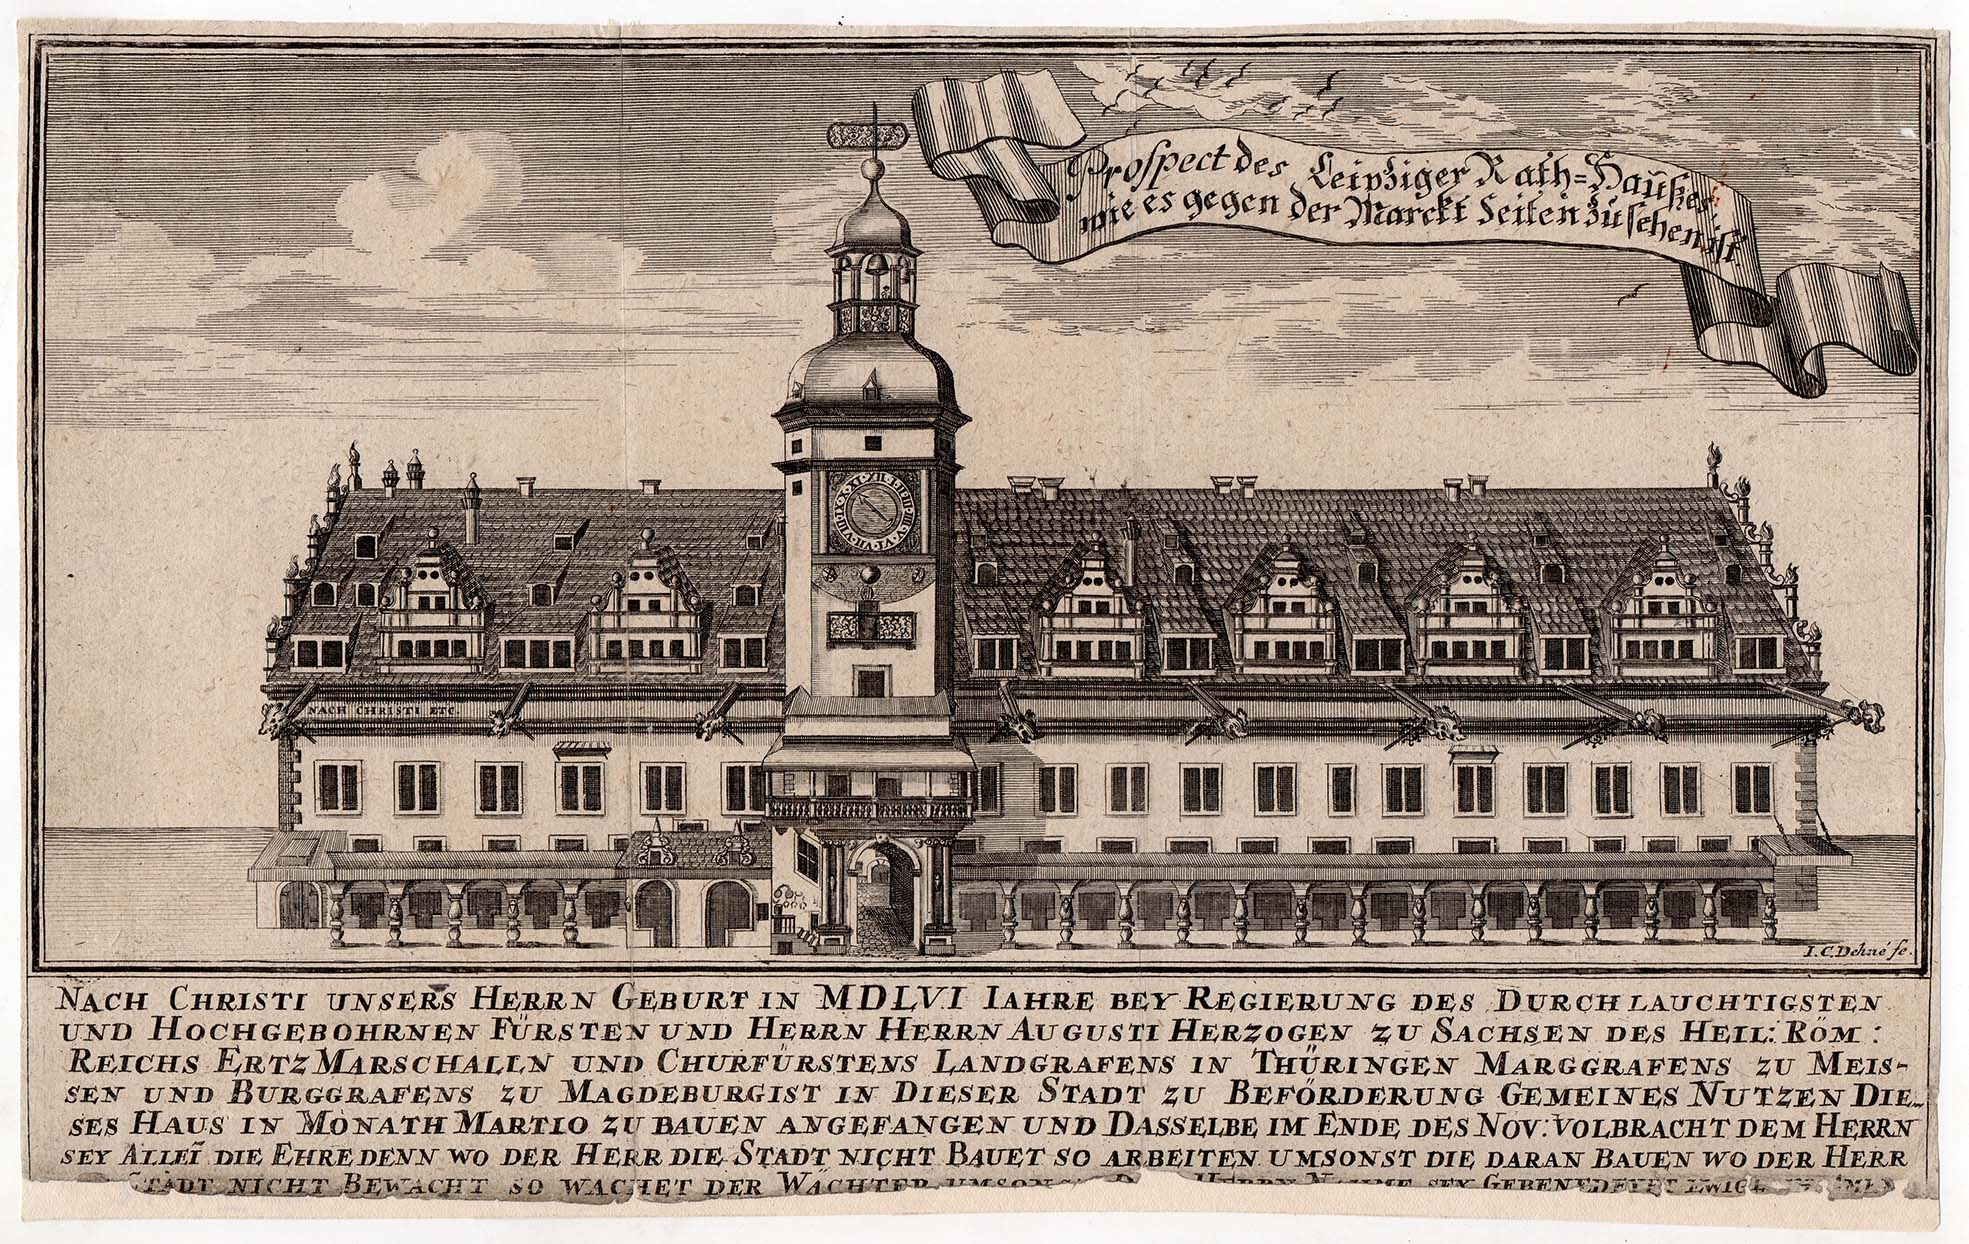 Etching of the Altes Rathaus (Old Town Hall) in Leipzig from 1672.